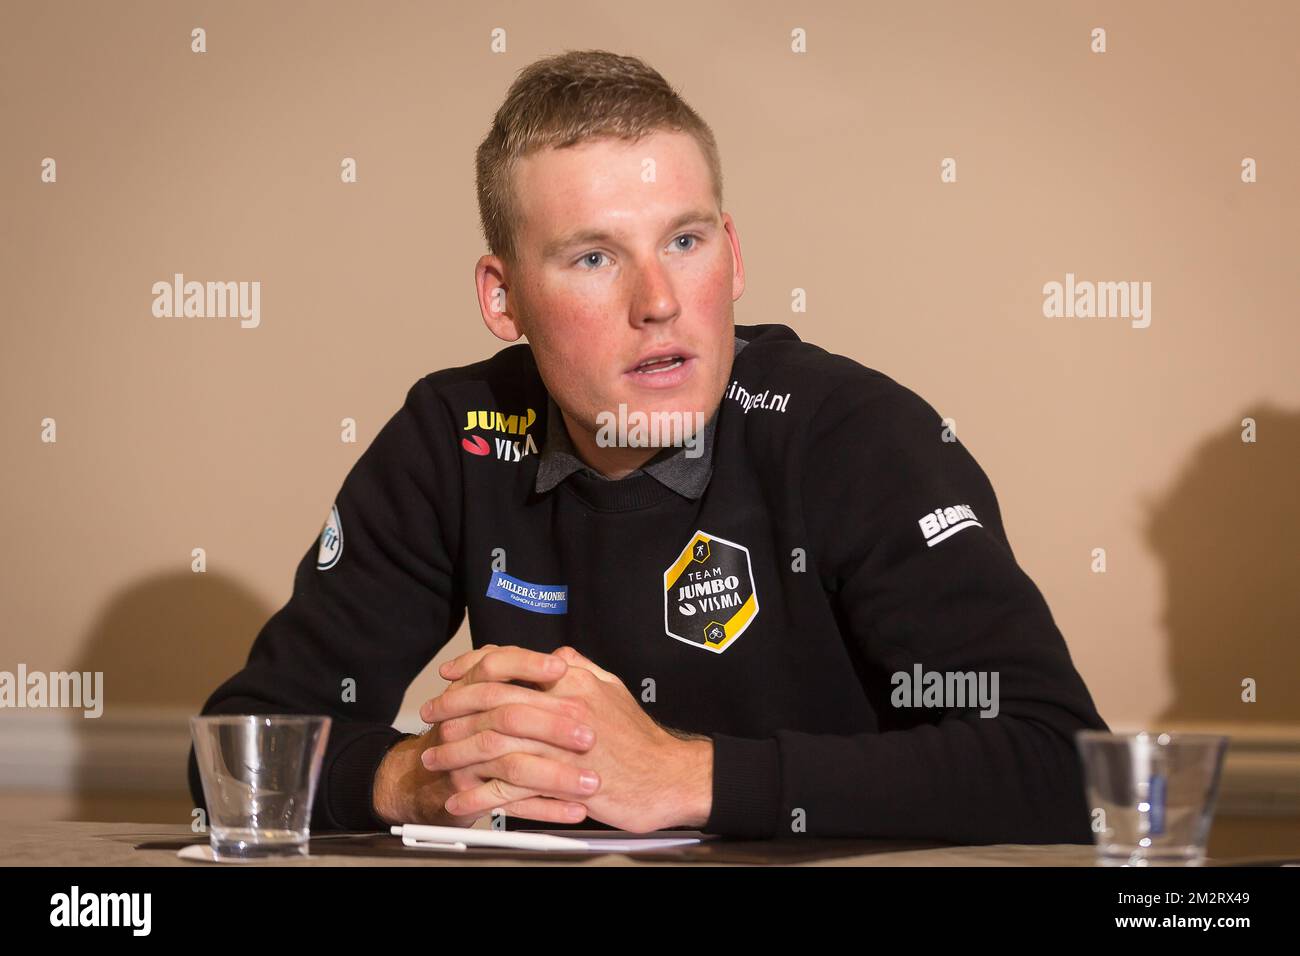 Dutch Mike Teunissen of Team Jumbo-Visma pictured during a press conference of team Jumbo Visma, Friday 05 April 2019, ahead of the 'Ronde van Vlaanderen - Tour des Flandres - Tour of Flanders' one day cycling race, in Gent. BELGA PHOTO JAMES ARTHUR GEKIERE Stock Photo